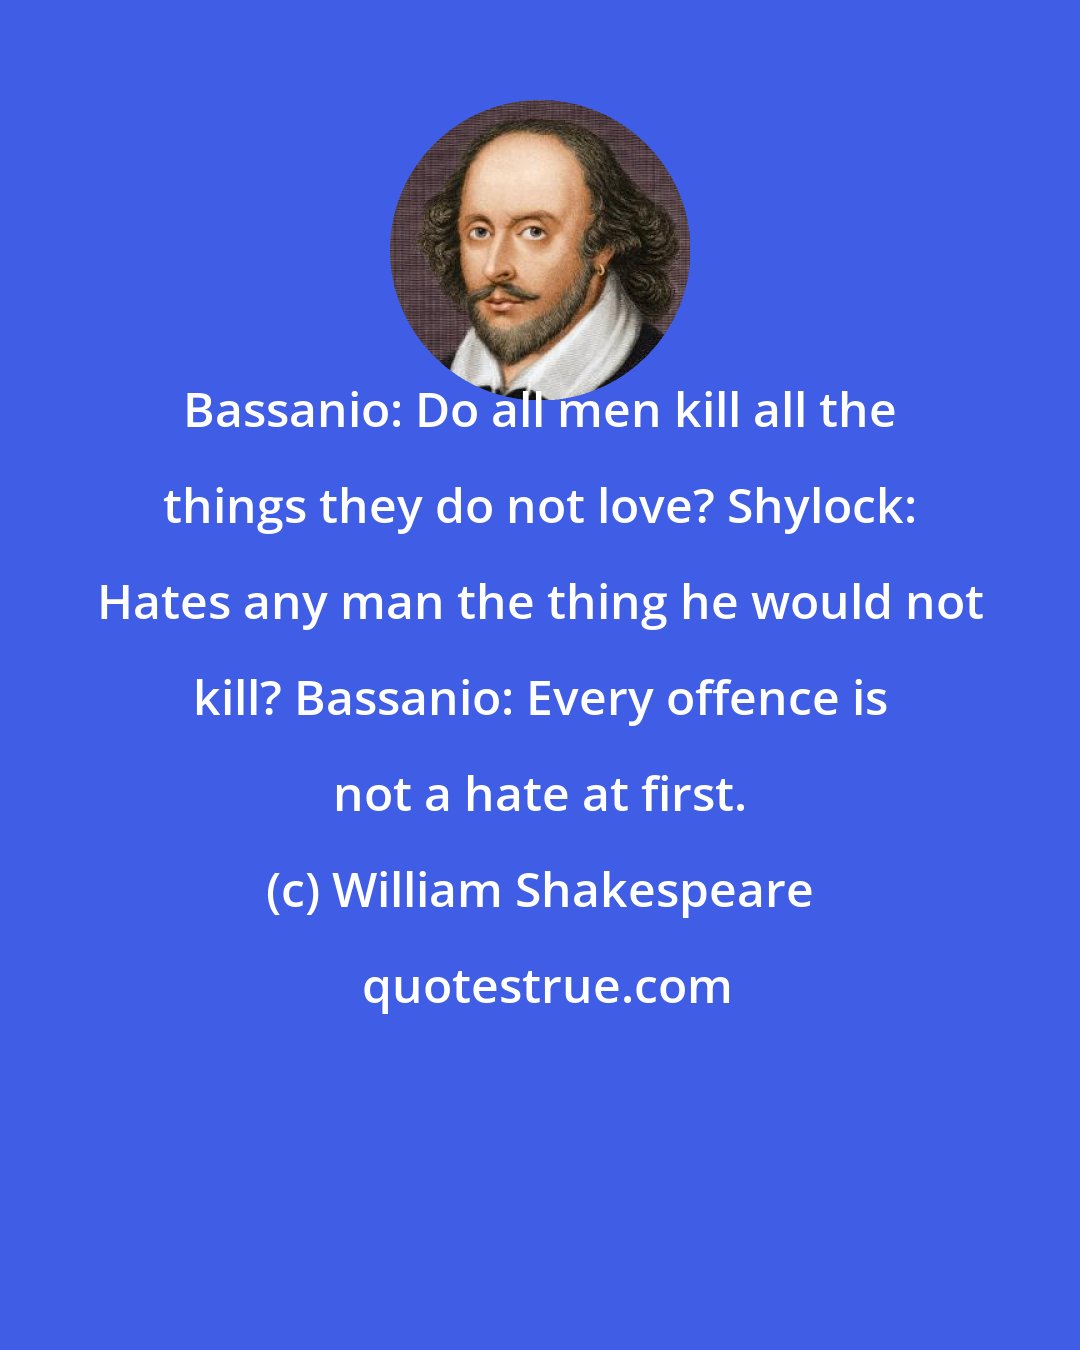 William Shakespeare: Bassanio: Do all men kill all the things they do not love? Shylock: Hates any man the thing he would not kill? Bassanio: Every offence is not a hate at first.